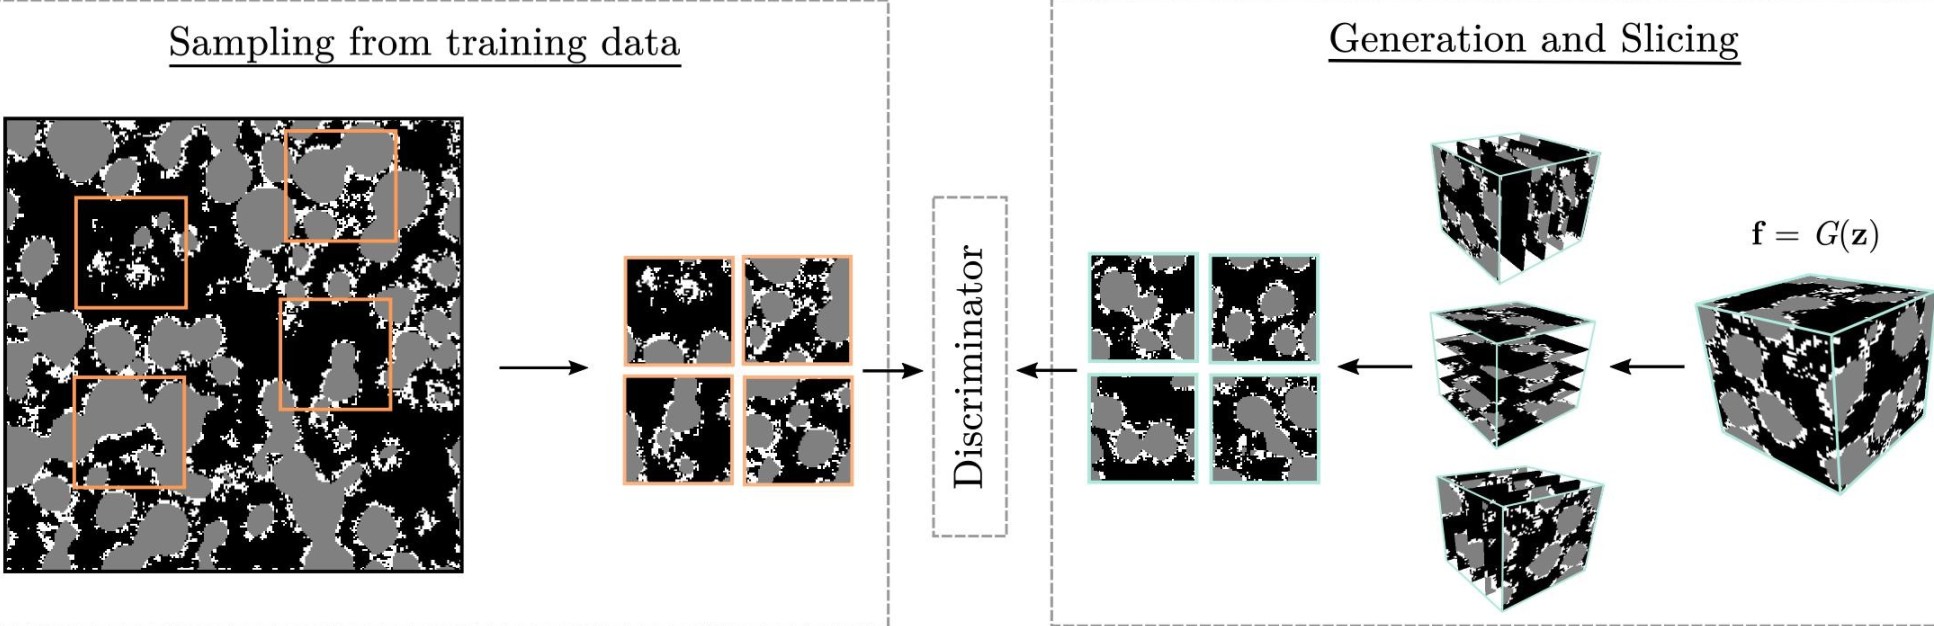 Modelling showing transformation from sampling and training data to generation of a 3D object